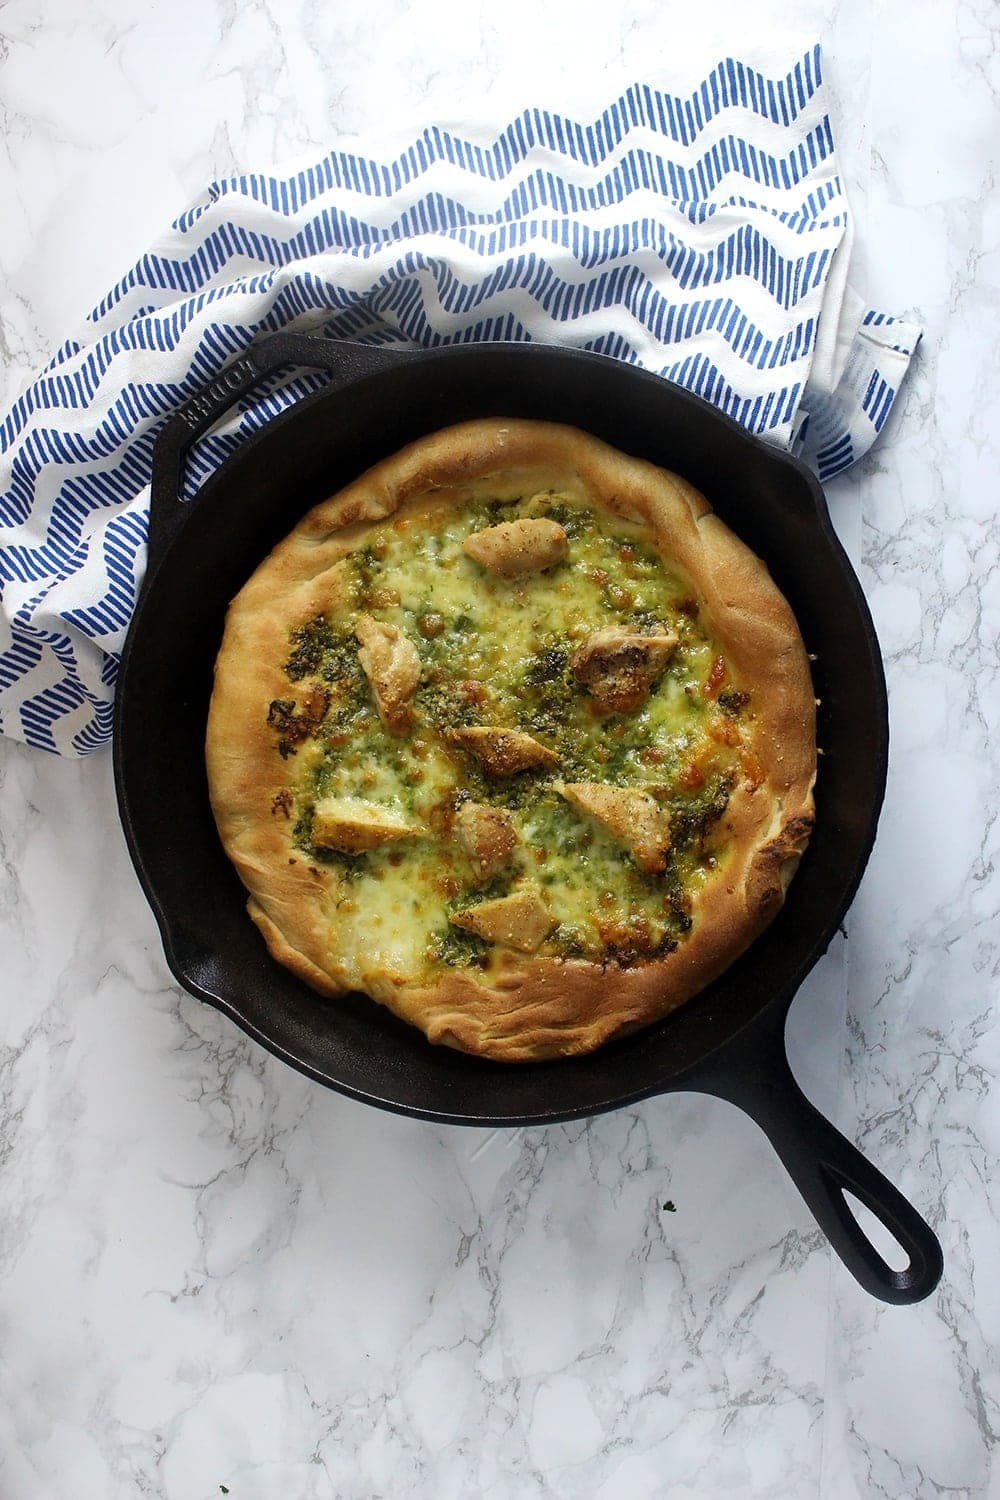 This rocket pesto chicken skillet pizza is a brilliant variation on a classic pizza. With a pesto base and a layer of mozzarella surrounding bits of chicken